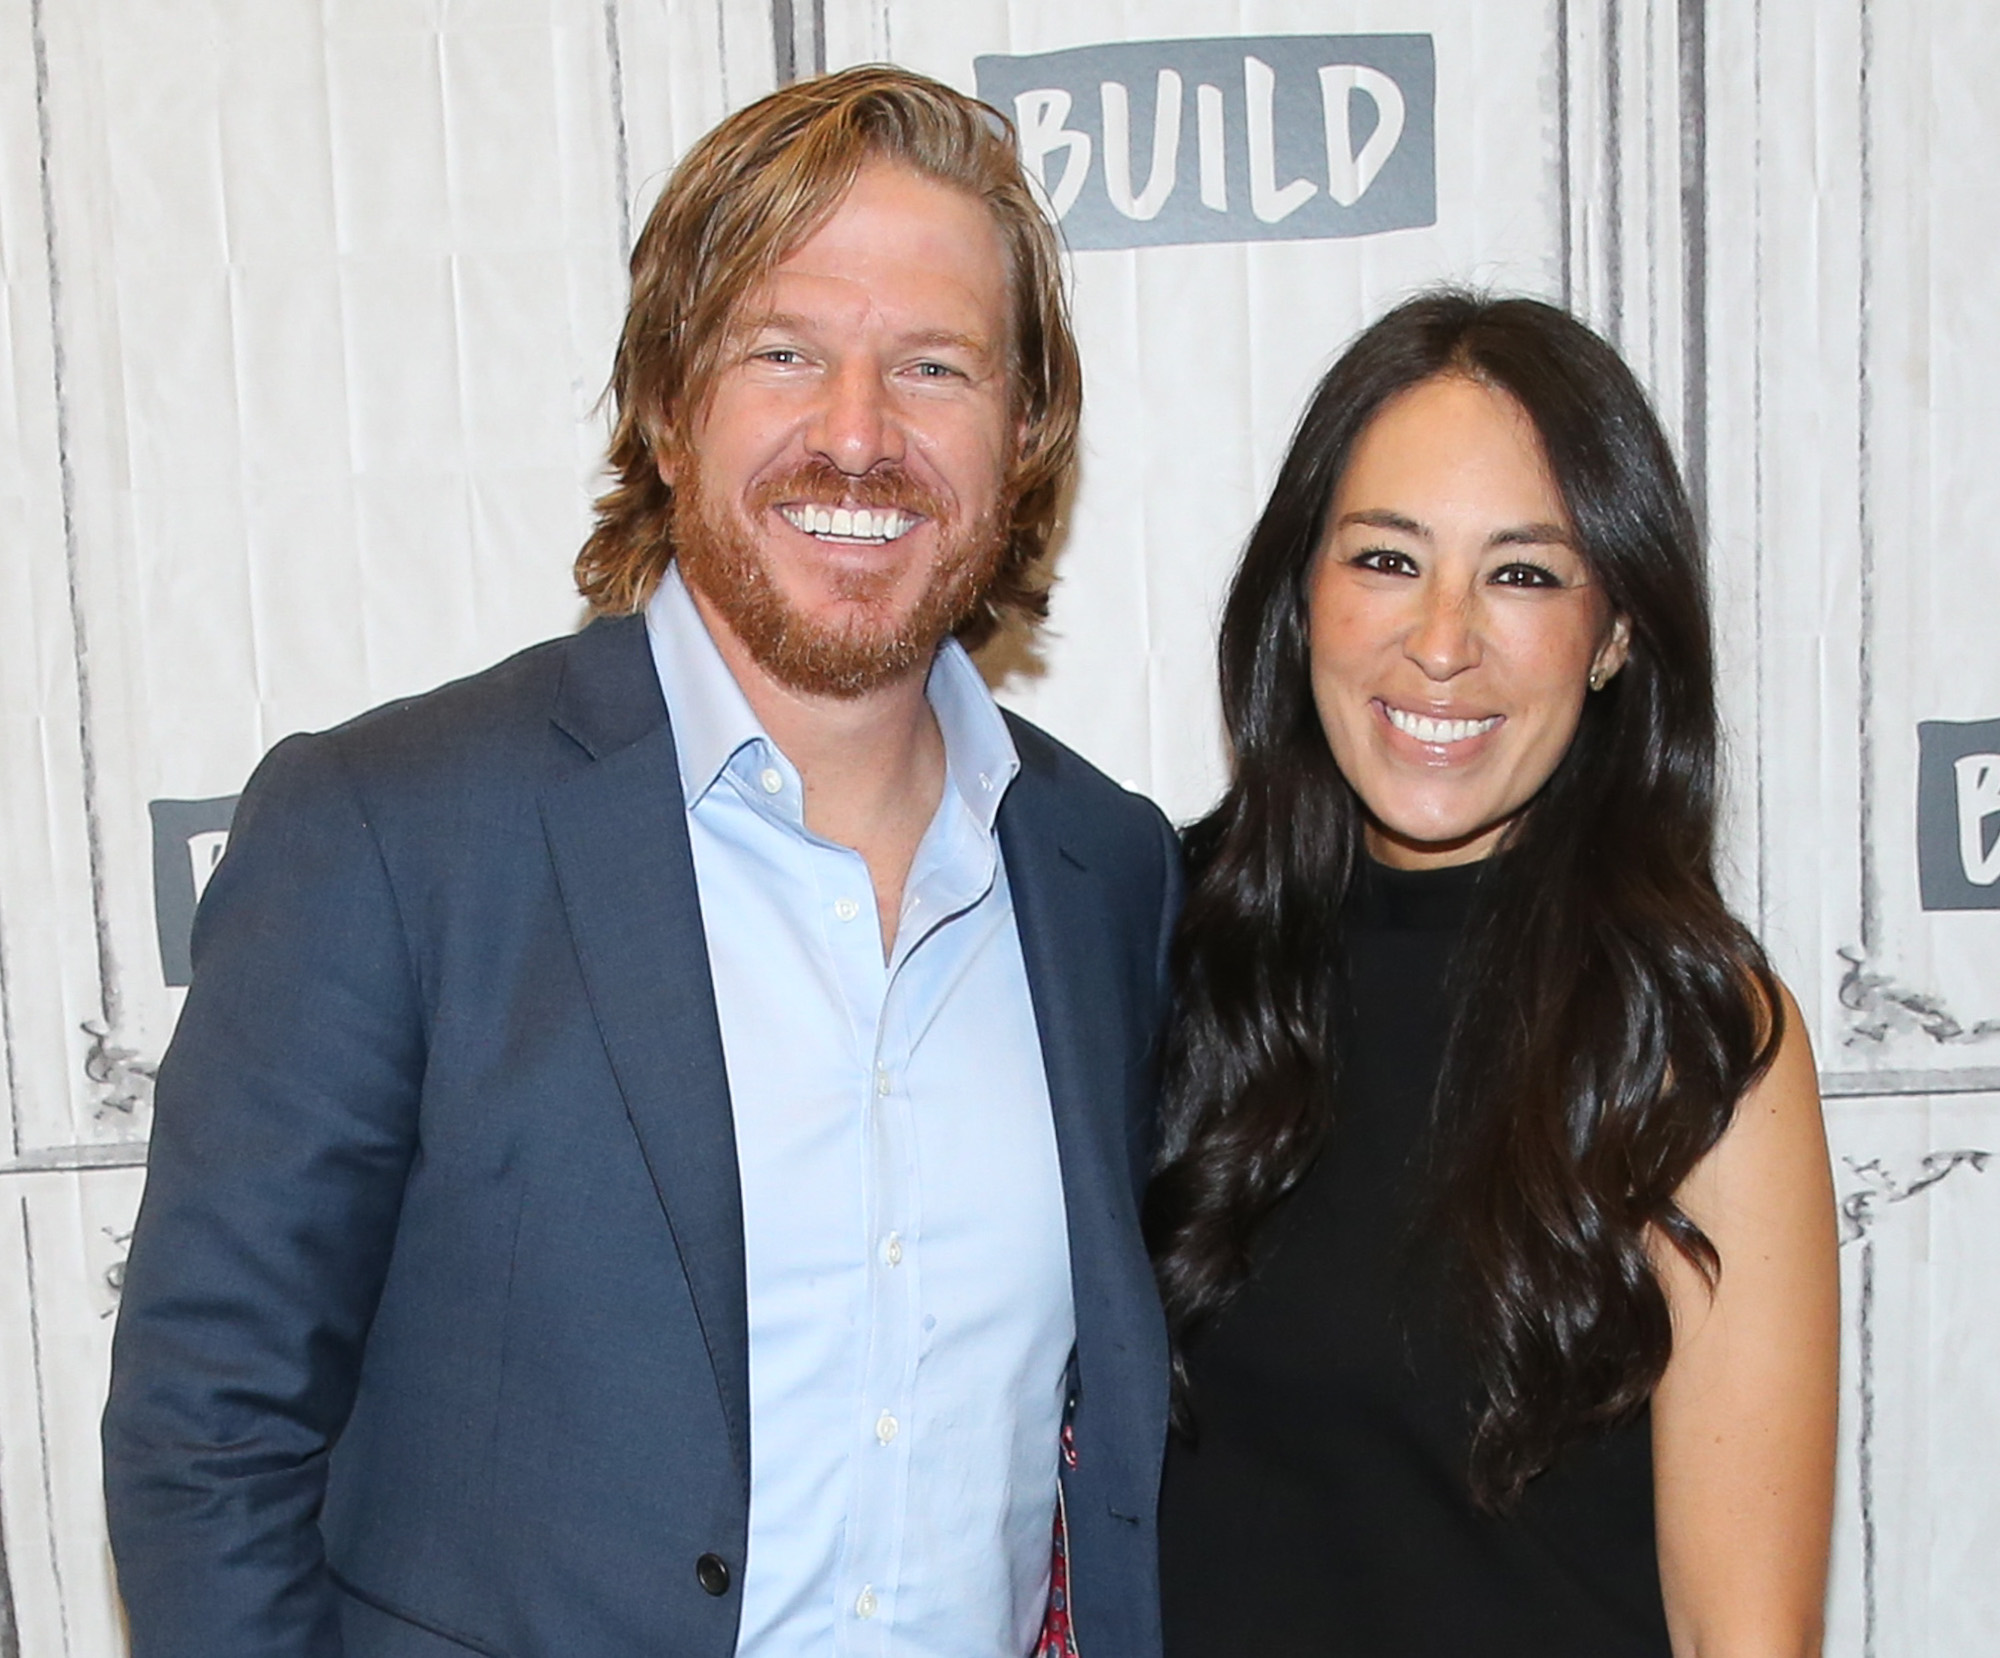 Chip and Joanna Gaines attending the Build series at Build Studios in 2017